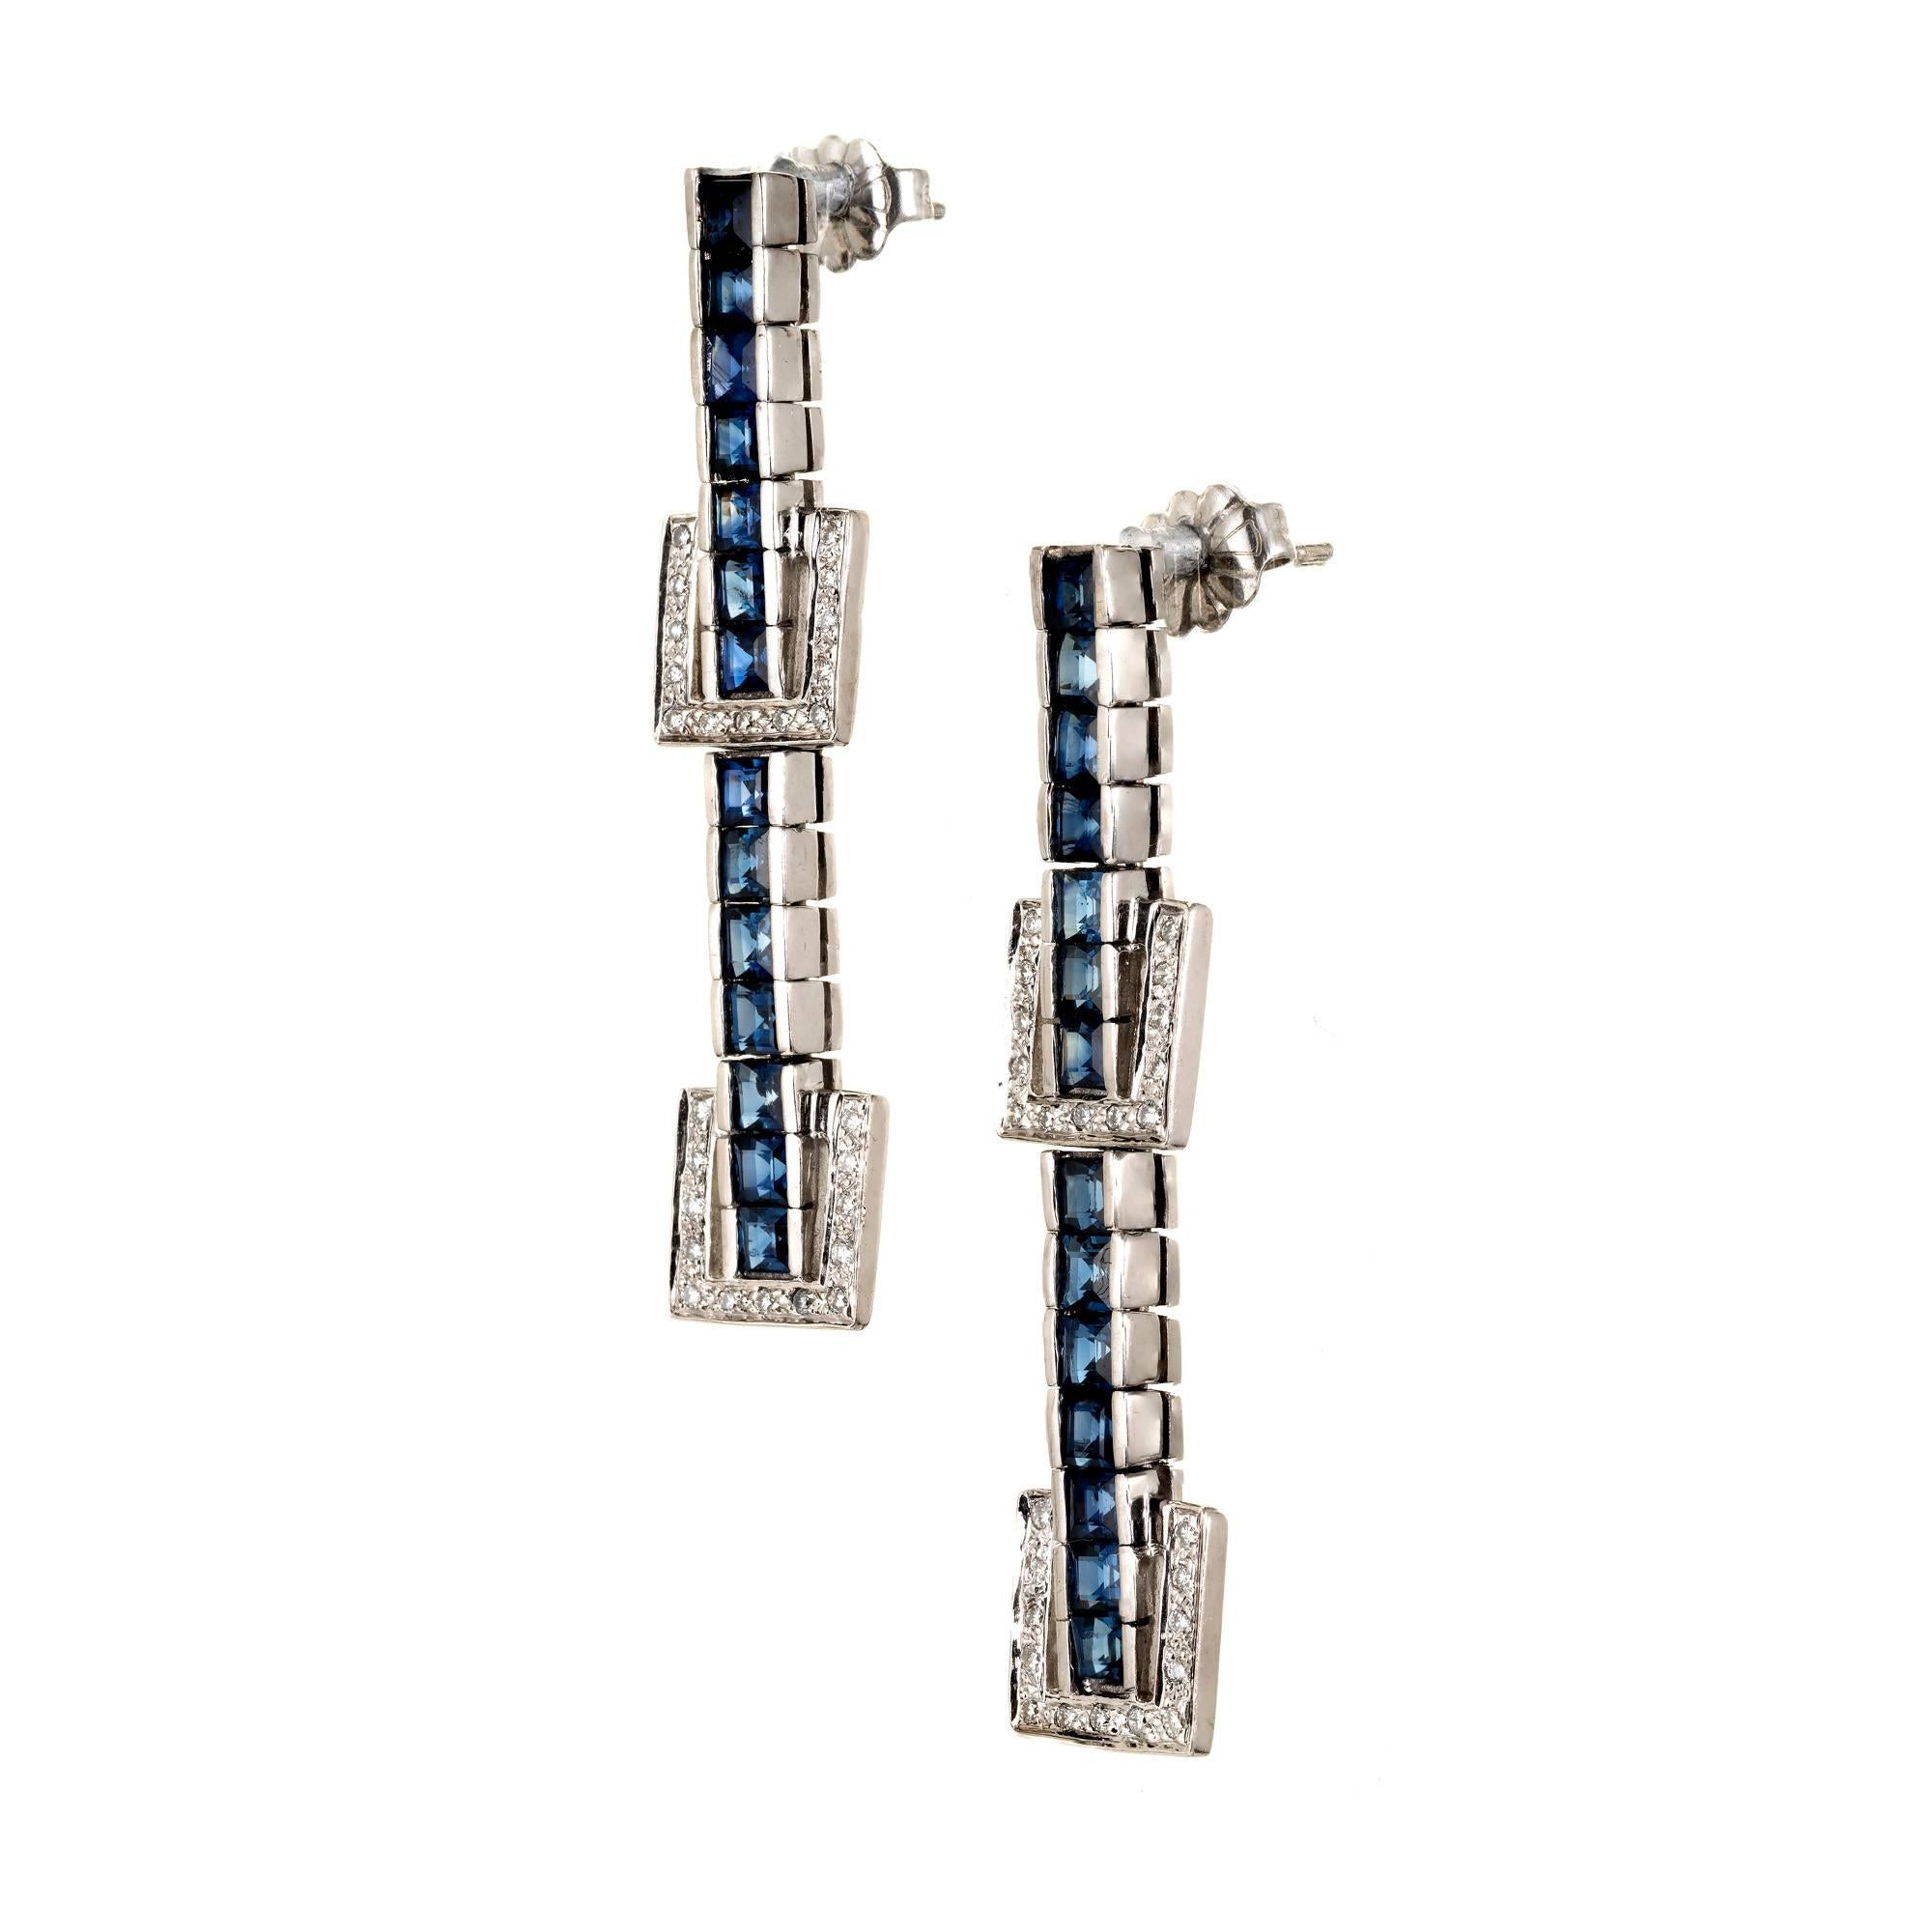 Delightful buckle design dangle earrings in 14k white gold with square bright blue Sapphires and full cut Diamonds.

14 square blue Sapphires, approx. total weight 2.00cts
52 full cut Diamonds, approx. total weight .20cts, H, VS – SI
14k white